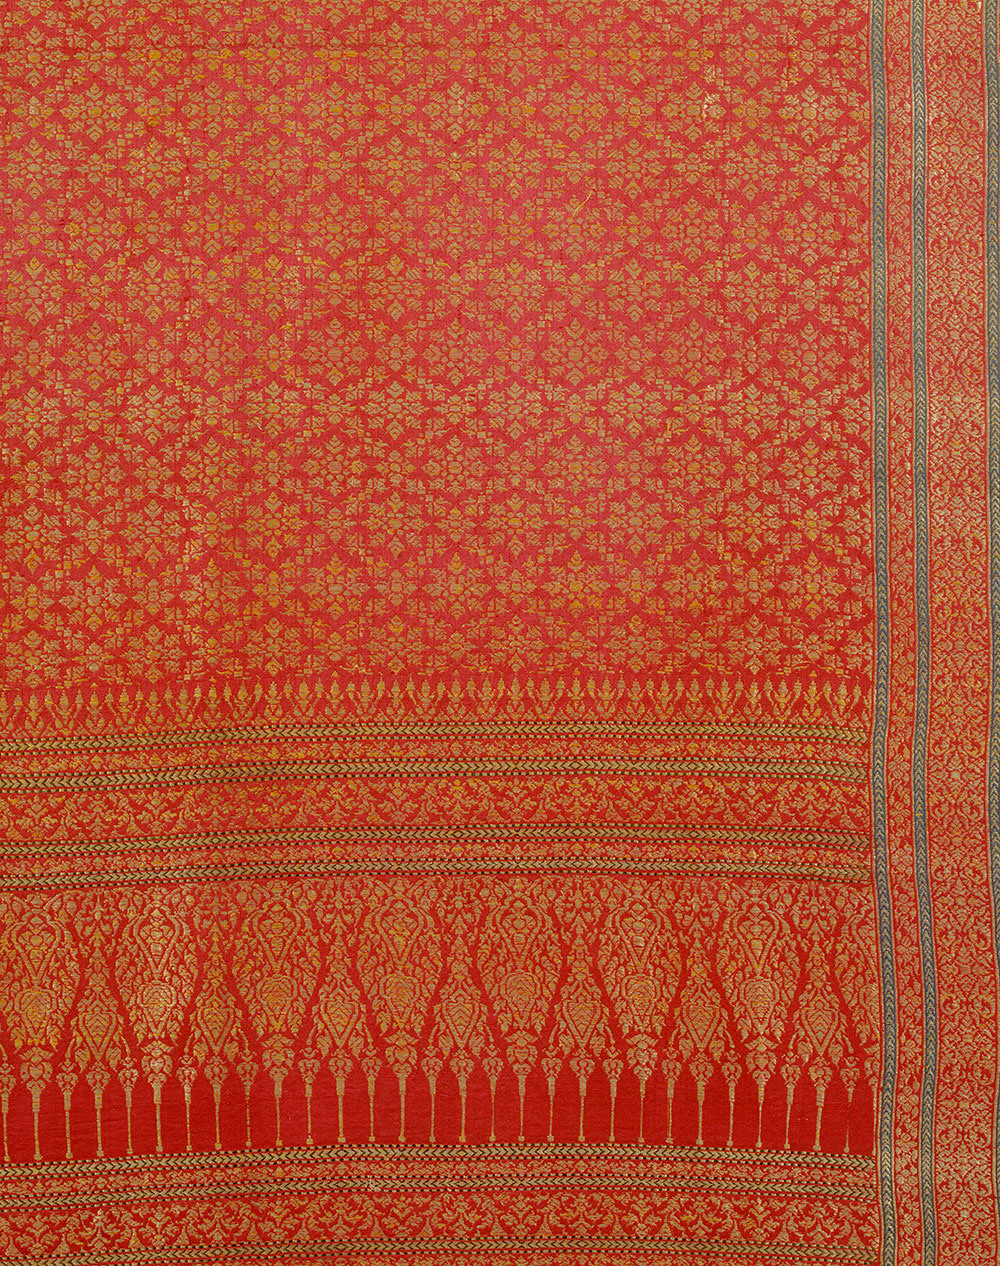 Ceremonial cloth woven silk and gold-wrapped thread Gujarat for the Thai market 19th century, Victoria and Albert Museum, London